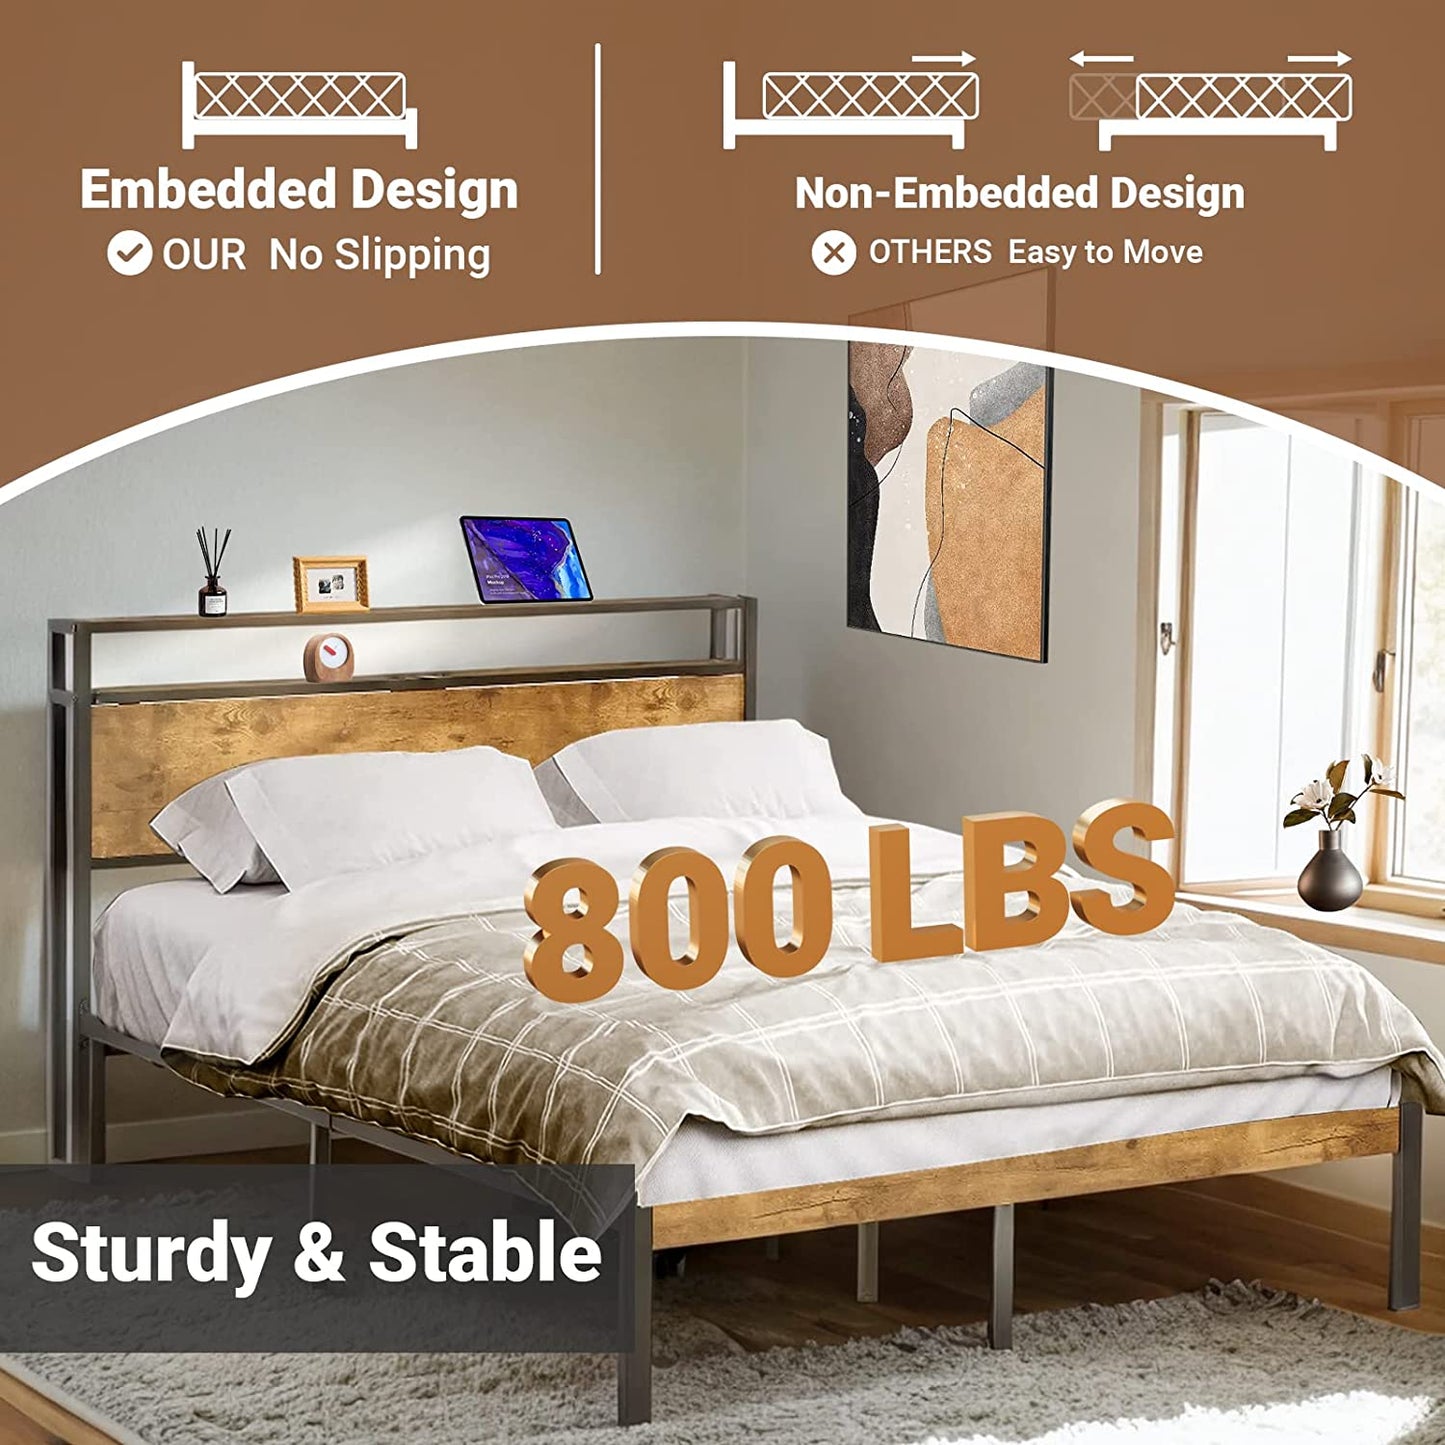 Zevemomo Queen Bed Frame, Queen Size Metal Platform Bed Frame with 2-Tier Storage Wood Headboard and Power Outlets, USB Ports Charging Station/No Box Spring Needed/Noise-Free/Easy Assembly/Brown